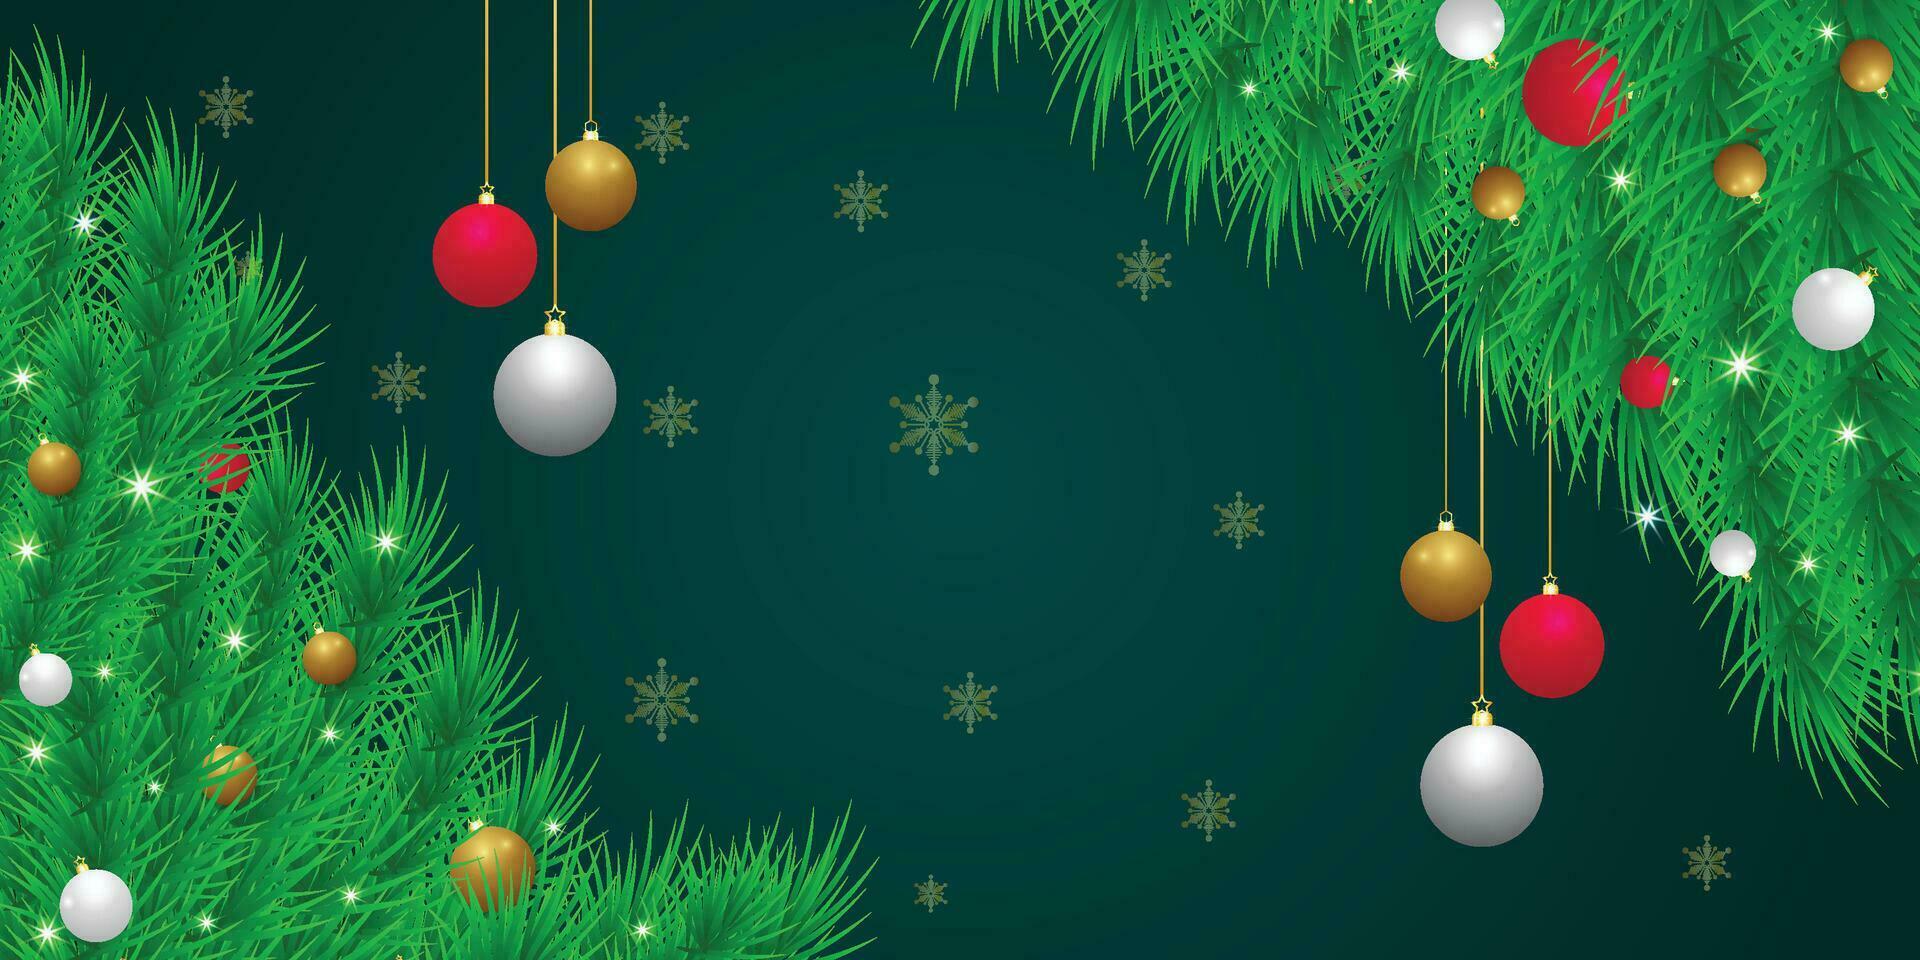 Realistic Christmas green leaf banner with red and white balls with lights and snowflakes. vector